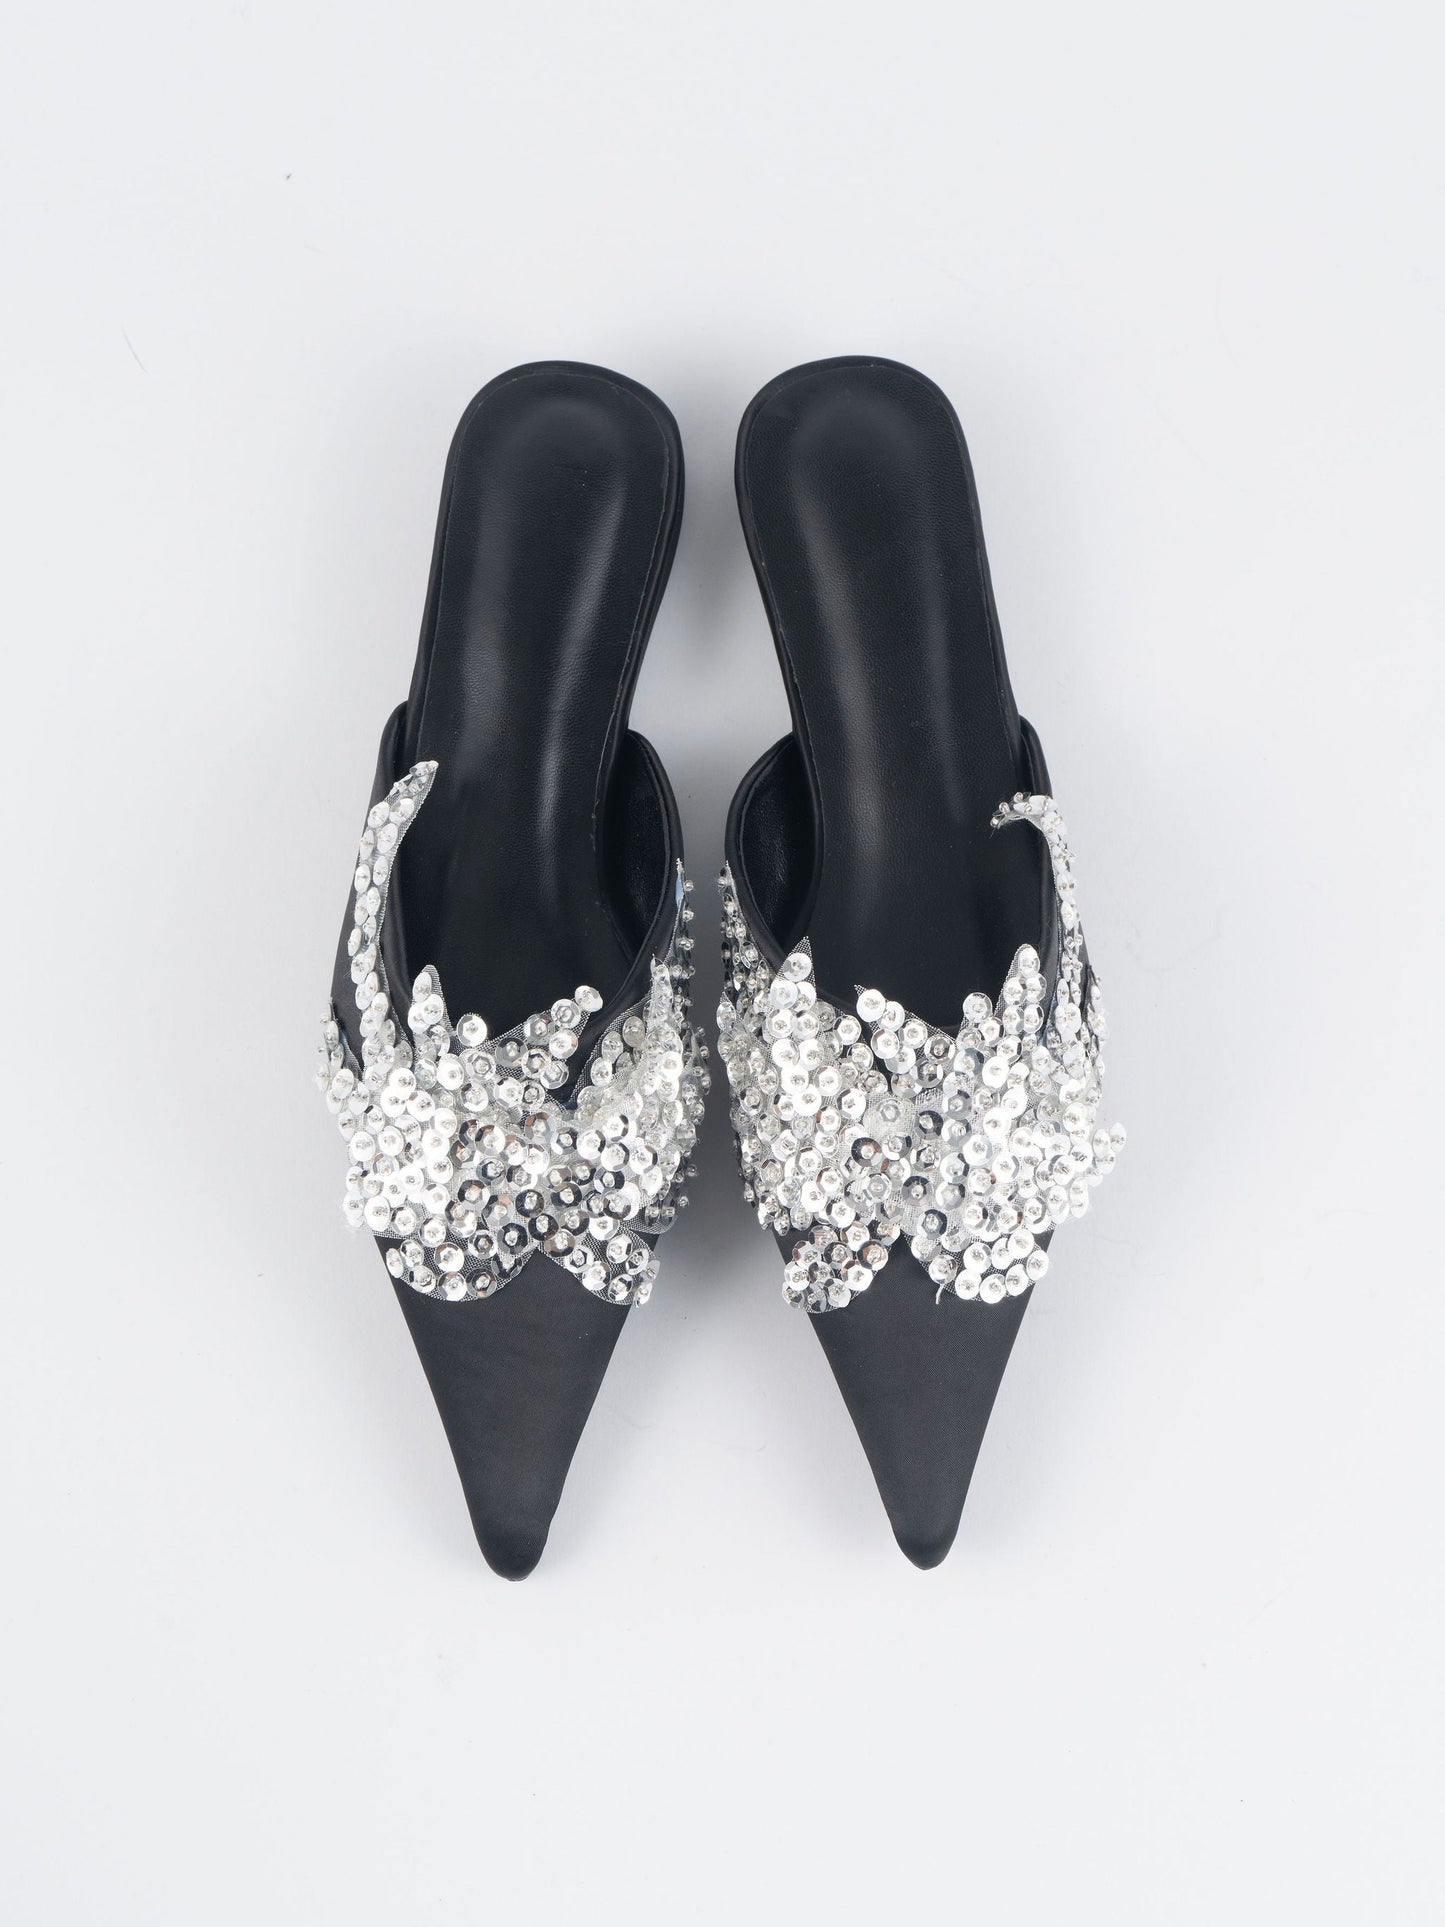 Pairs Shine Pointy Toe Rhinestone Flats - Limited Release